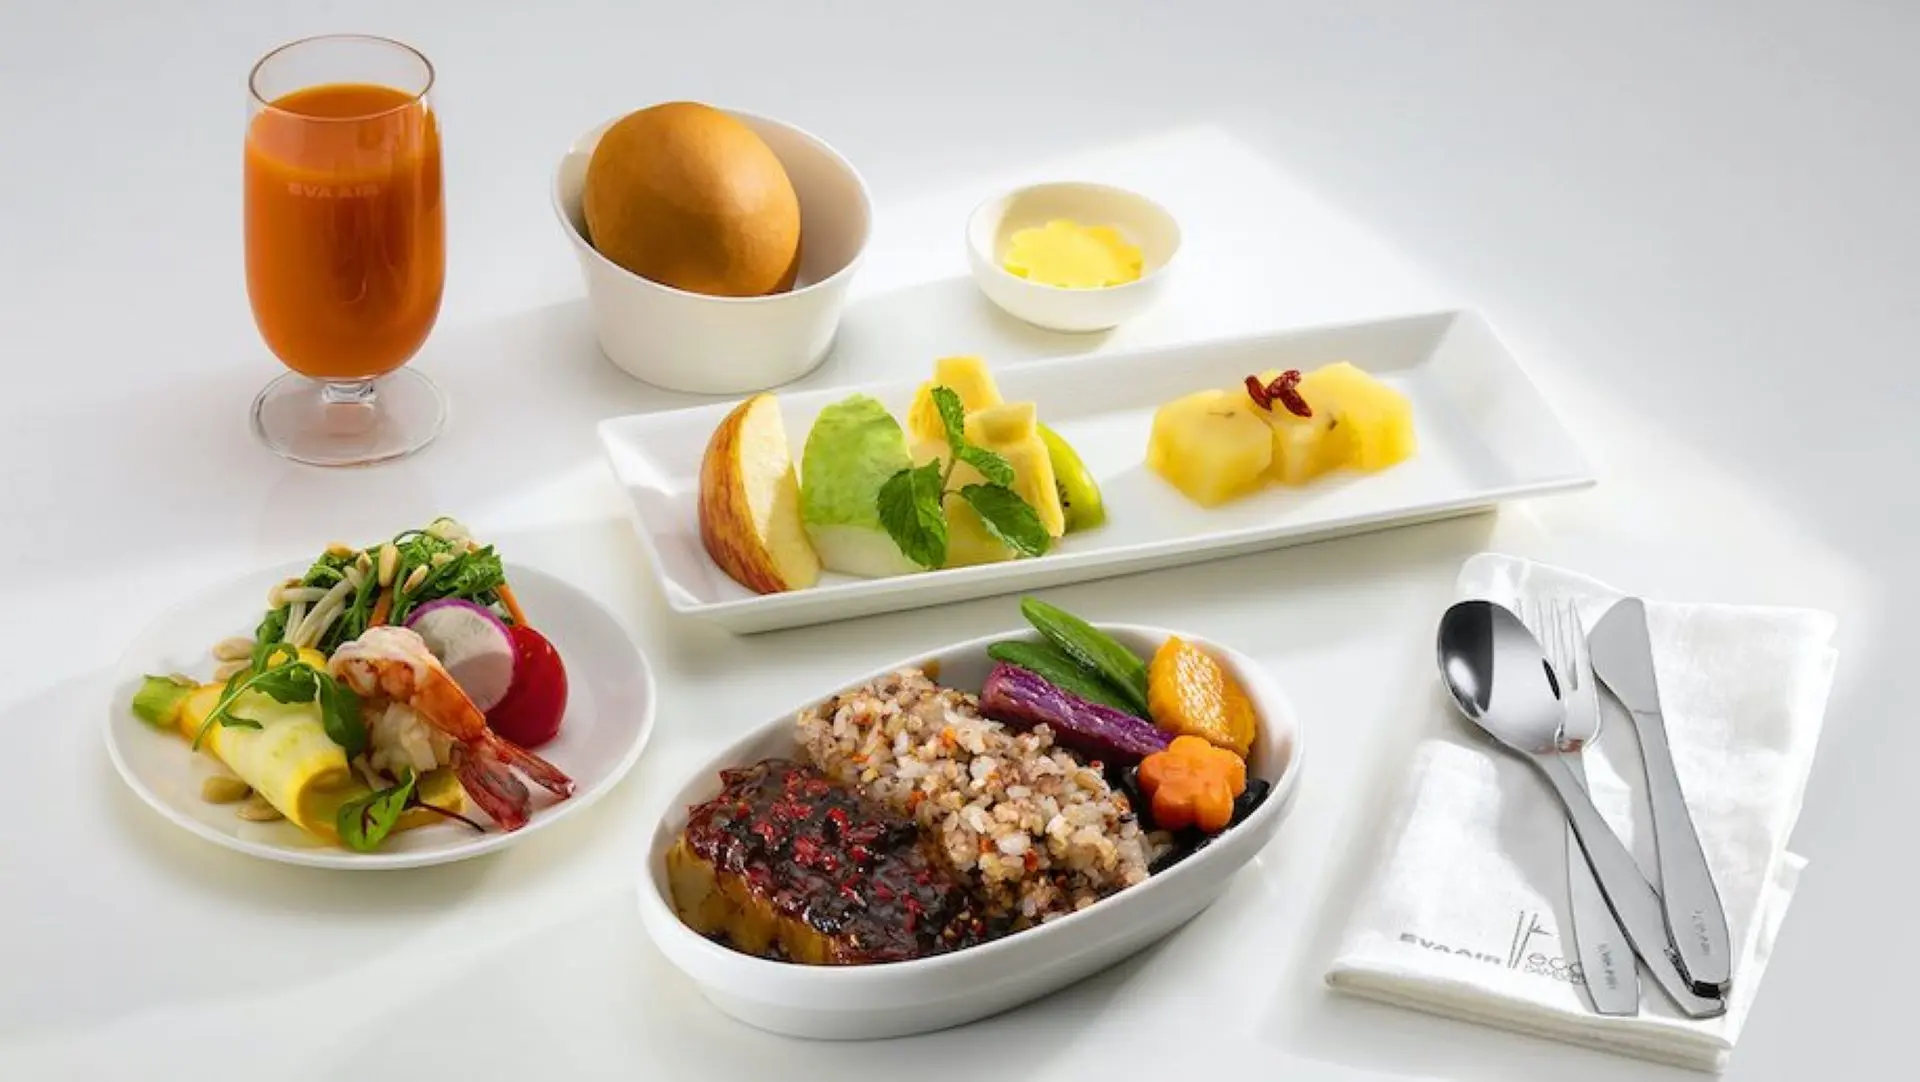 Airlines News - EVA Air to sell Business Class meals to Premium Economy passengers